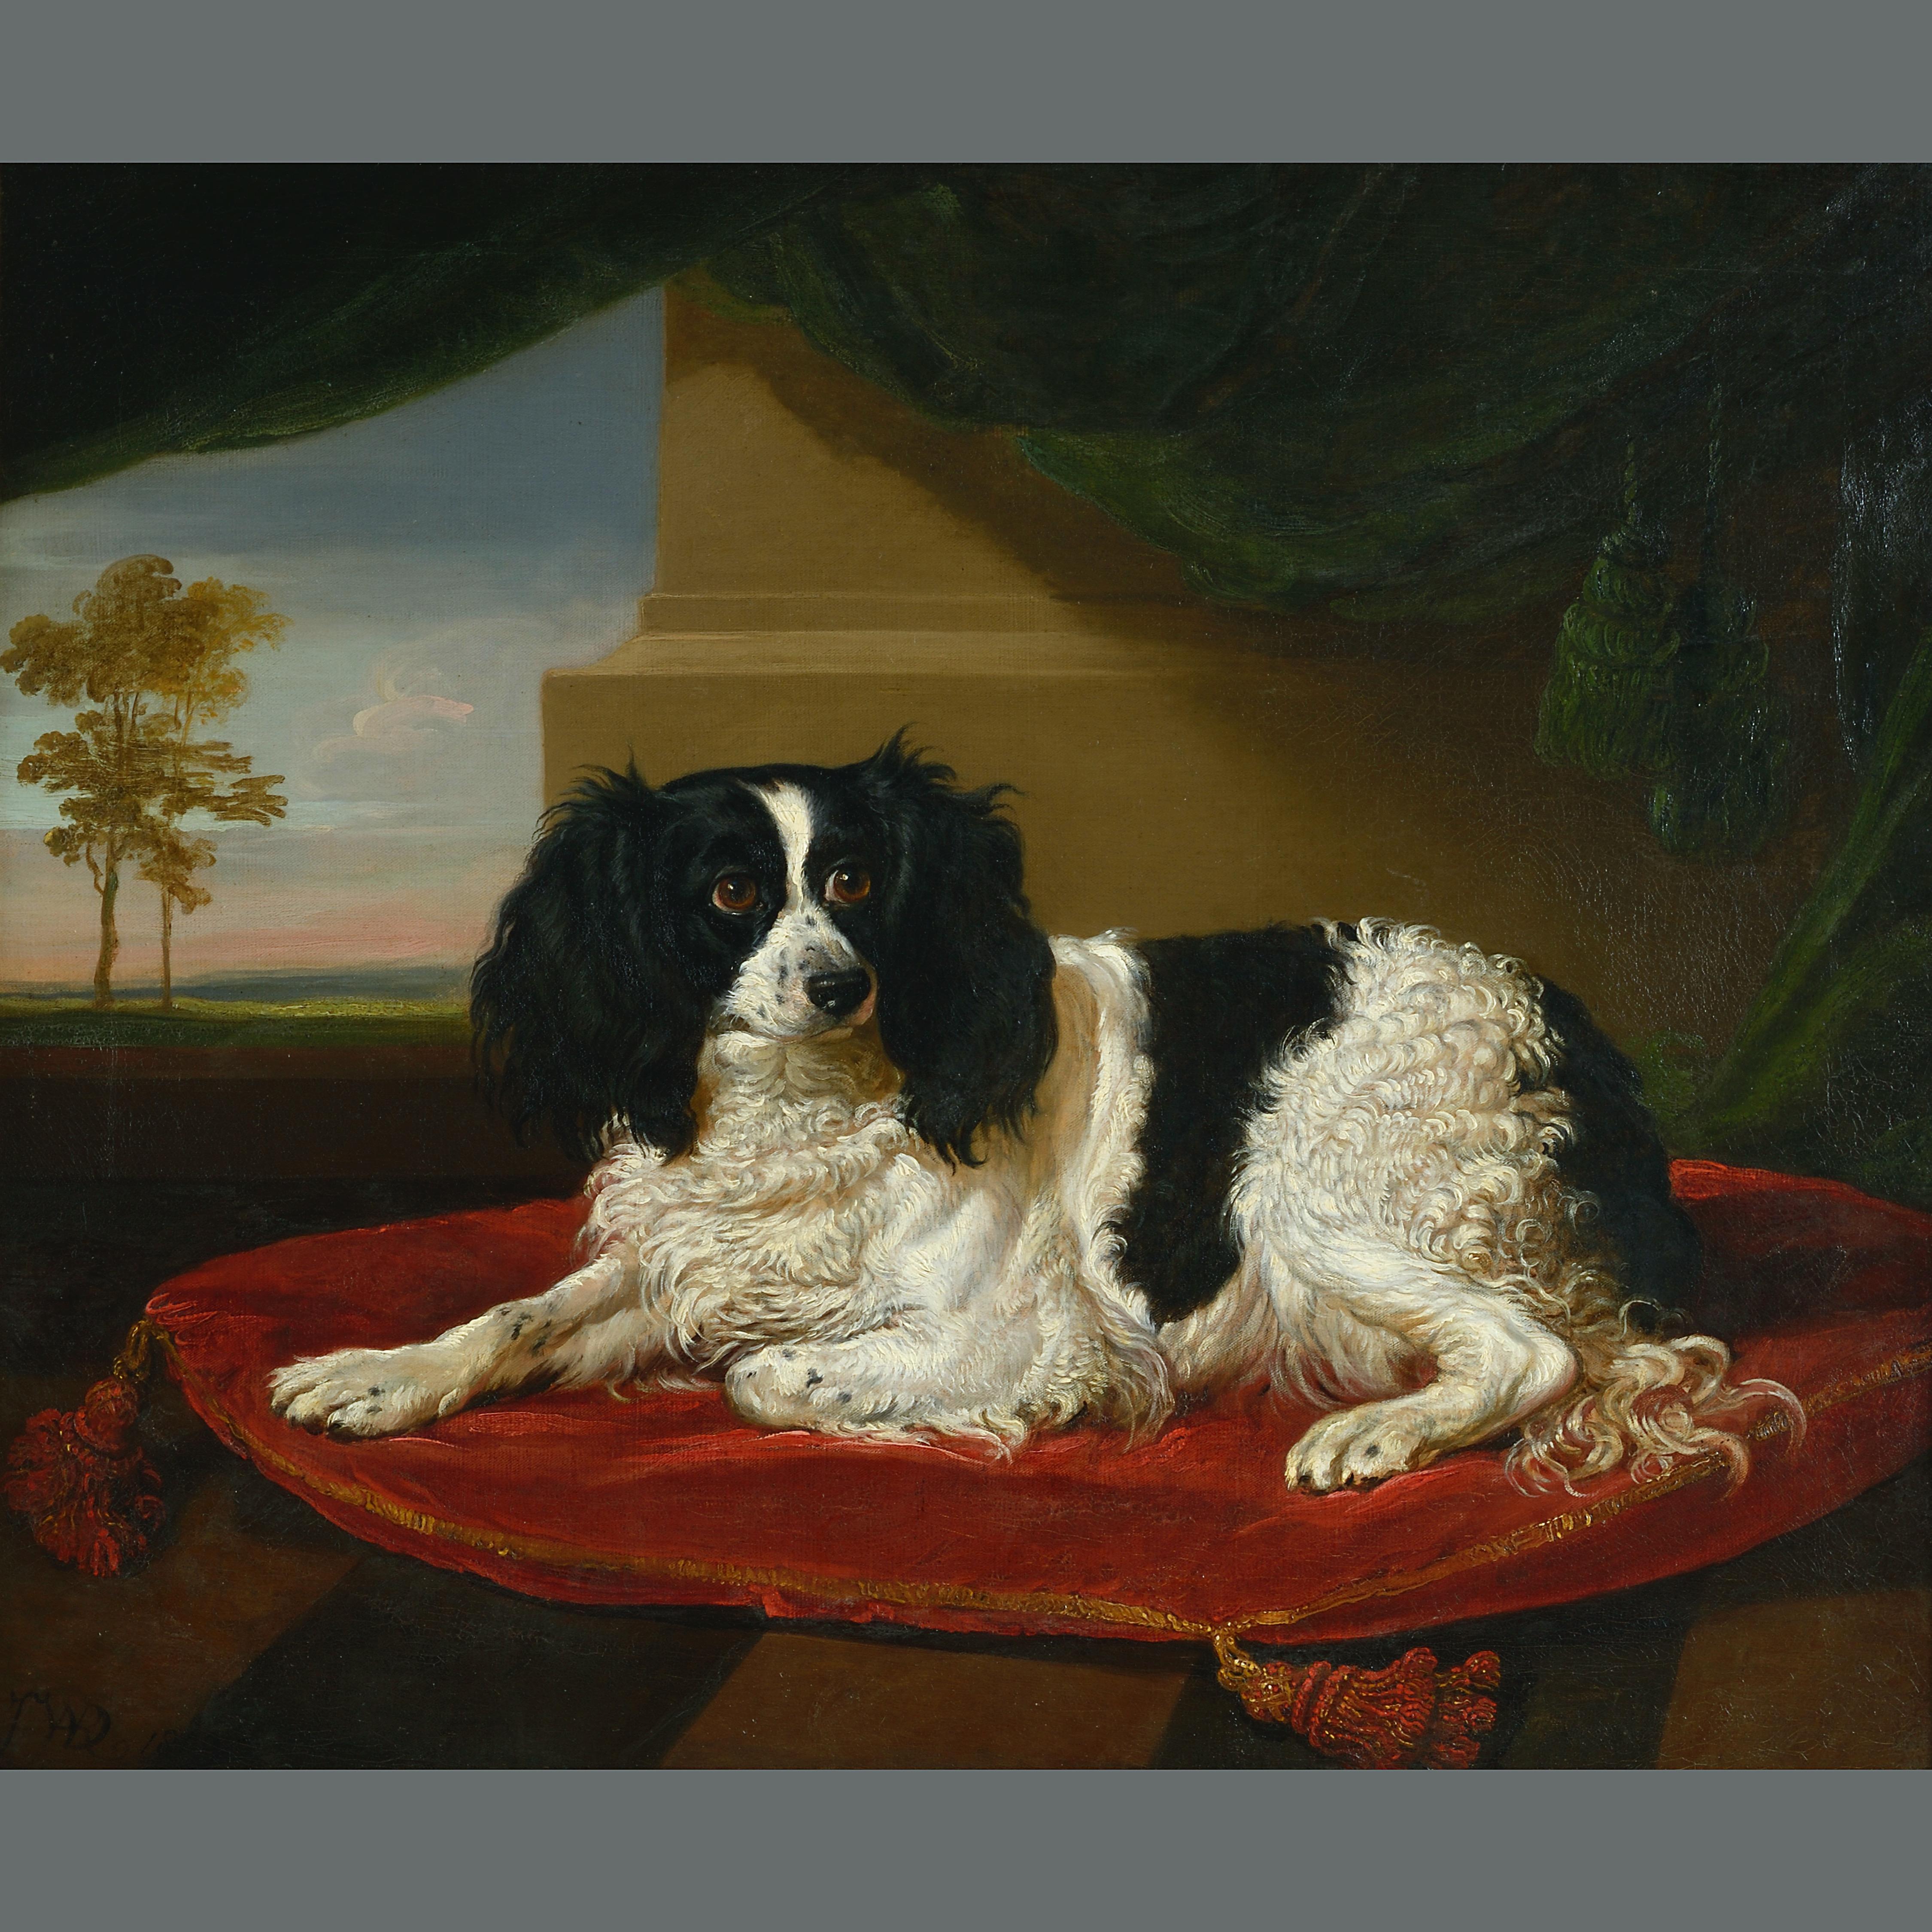 JAMES WARD, R.A. (1769-1859)

A KING CHARLES SPANIEL ON A RED CUSHION

signed with monogram and dated 'JWD 1809'

Oil on canvas.